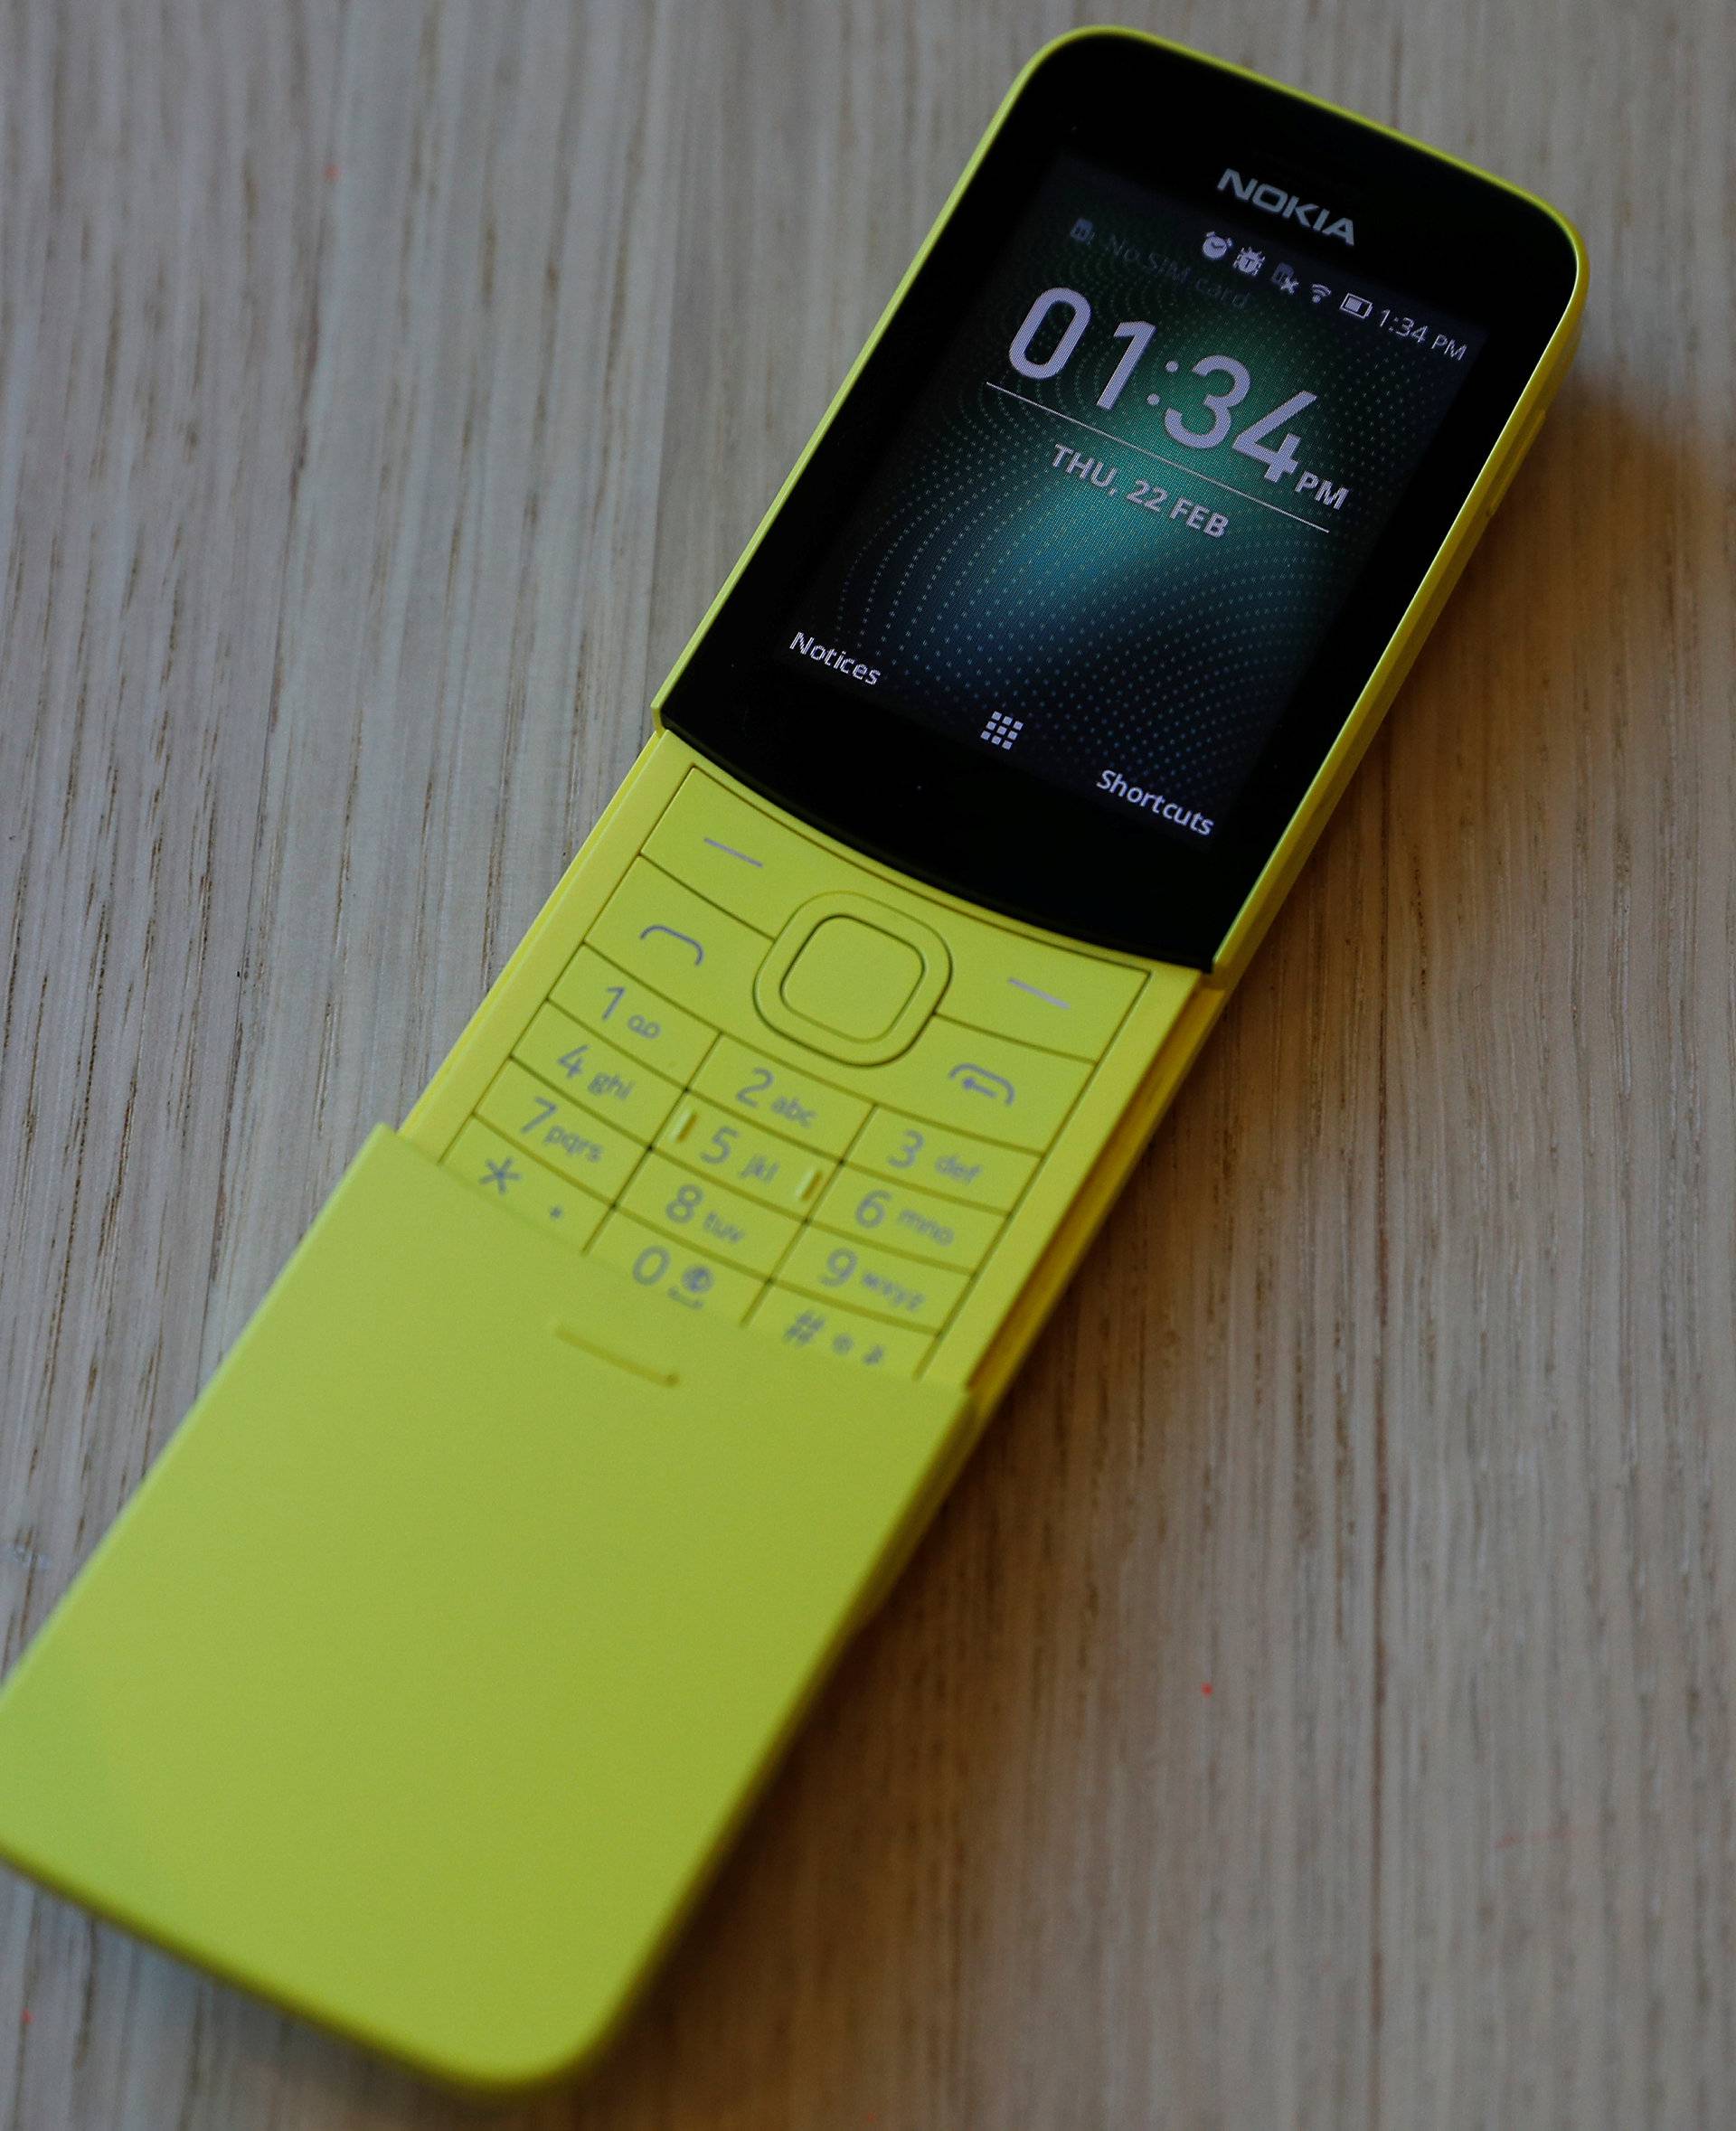 The Nokia 8110 Feature phone is seen at a pre-launch event in London